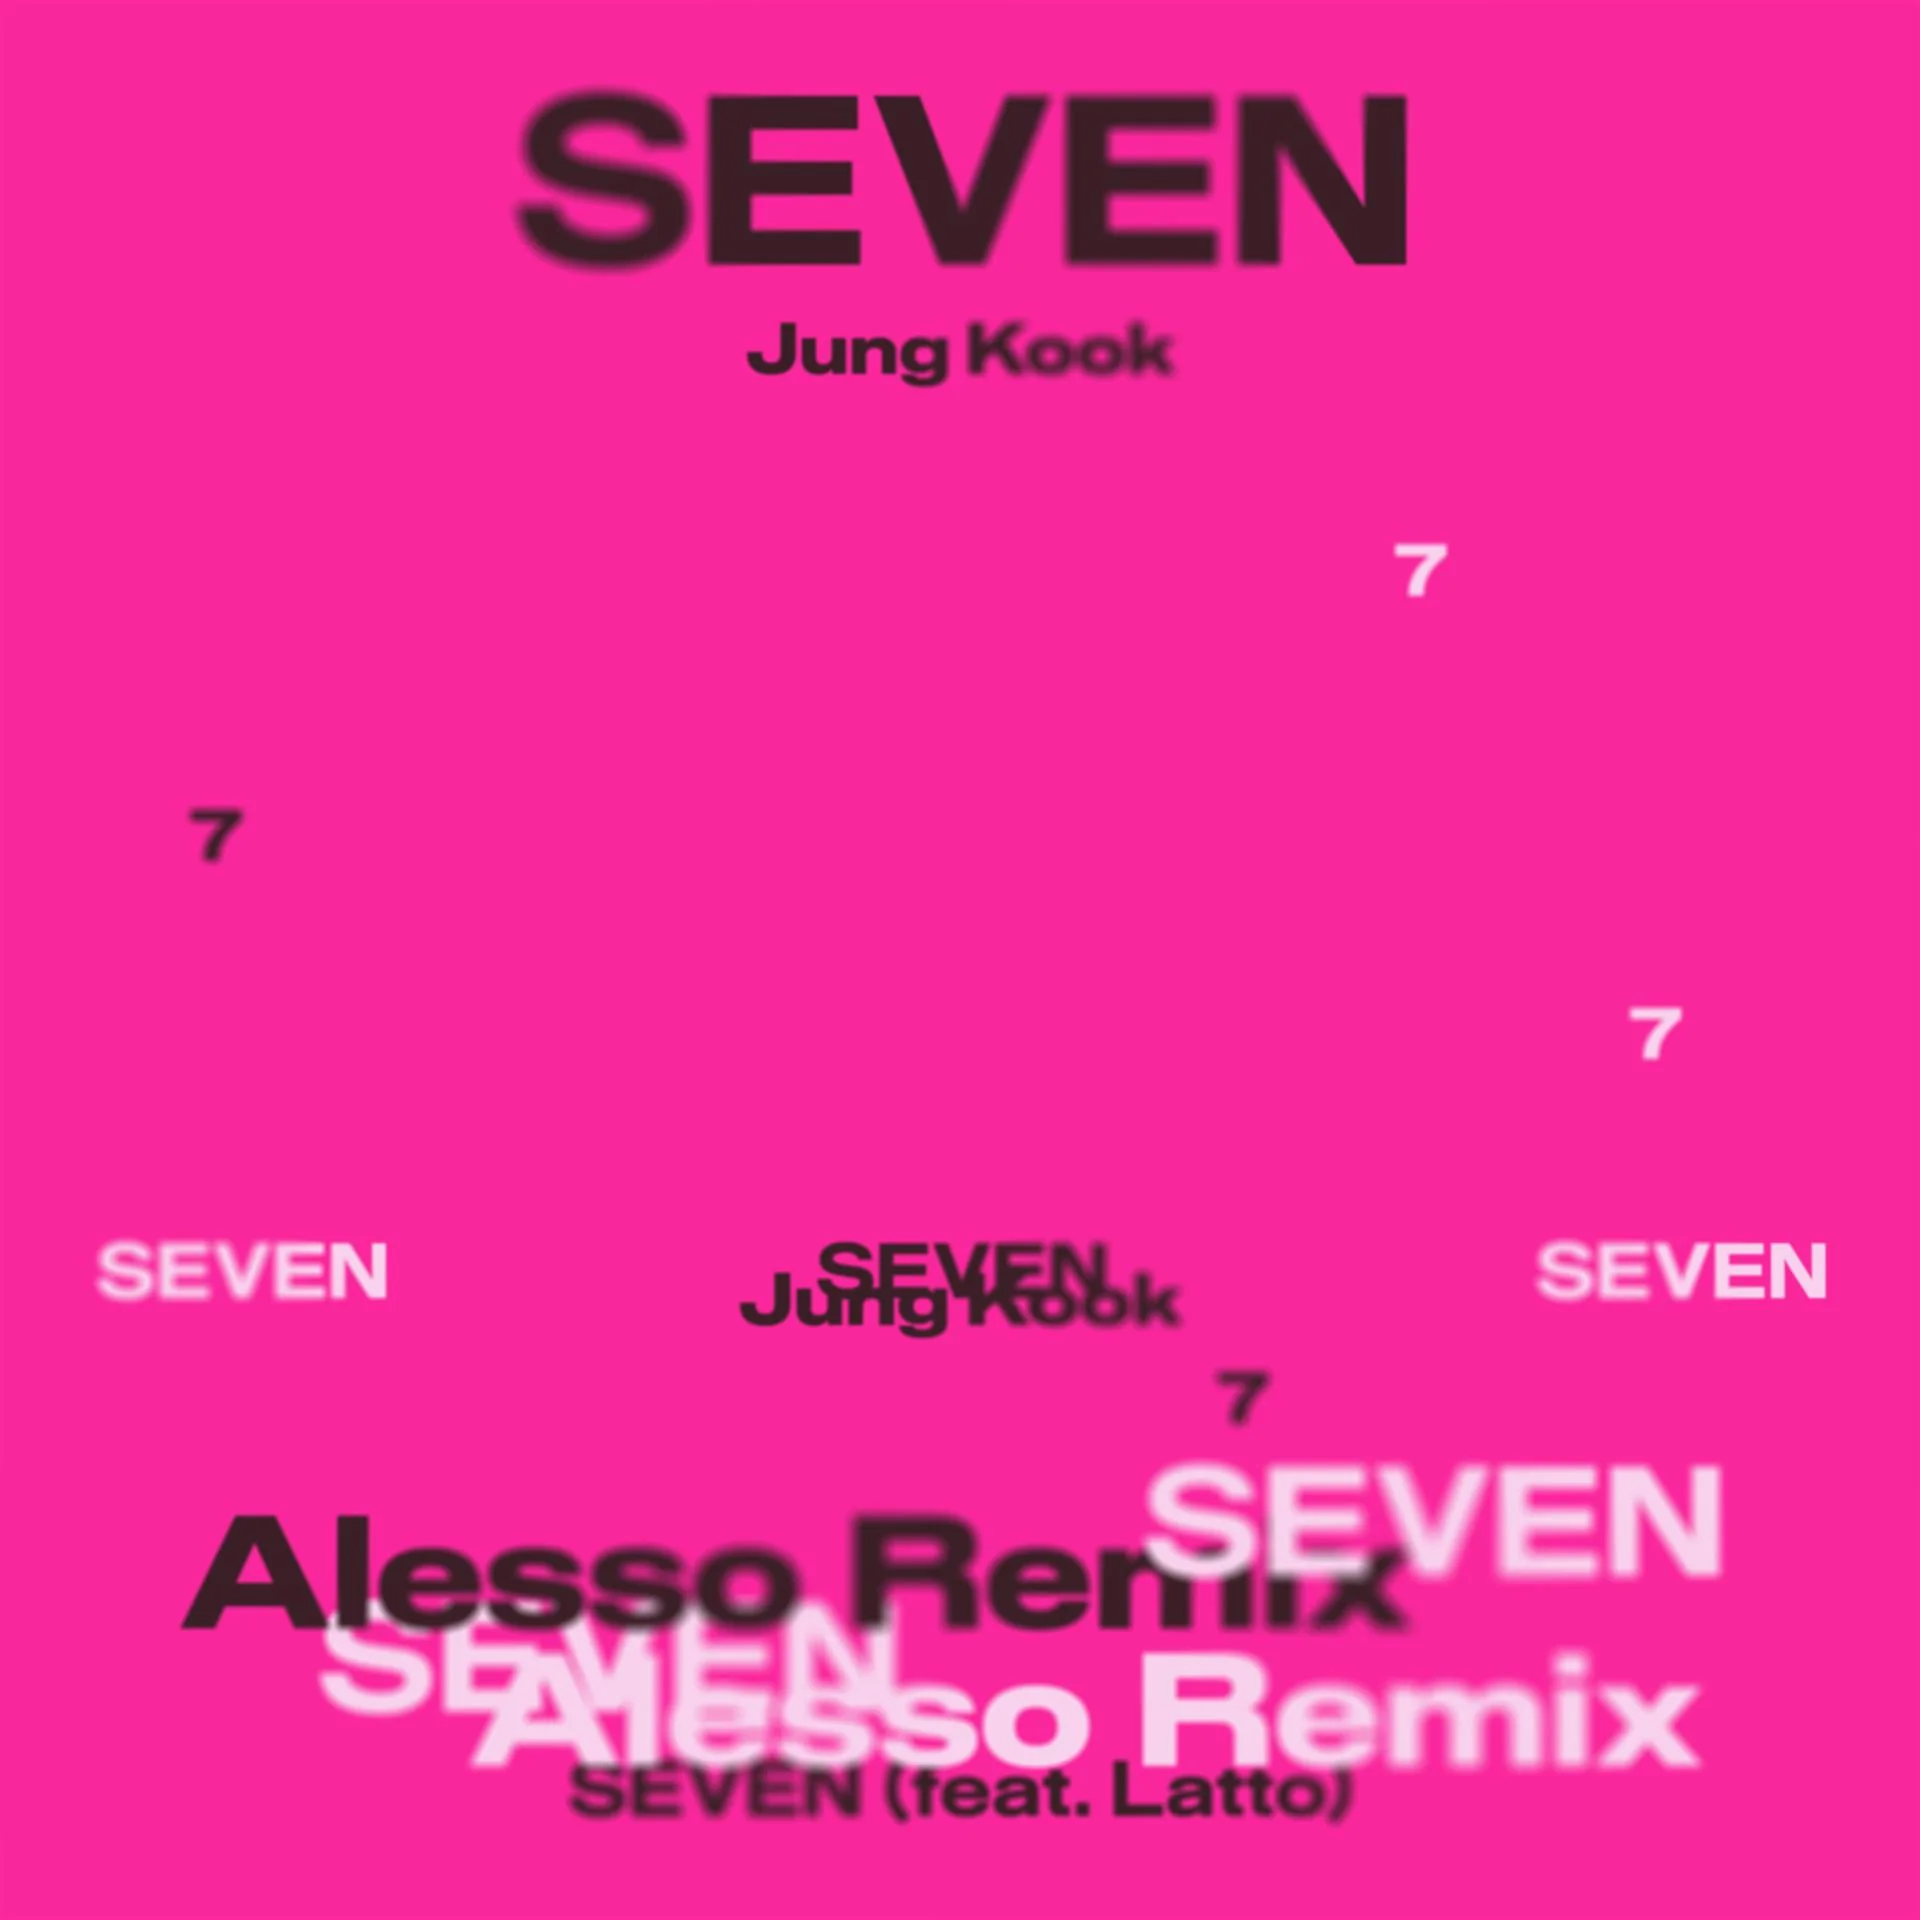 Jung Kook of BTS Releases “Seven (Feat. Latto) Alesso Remix”